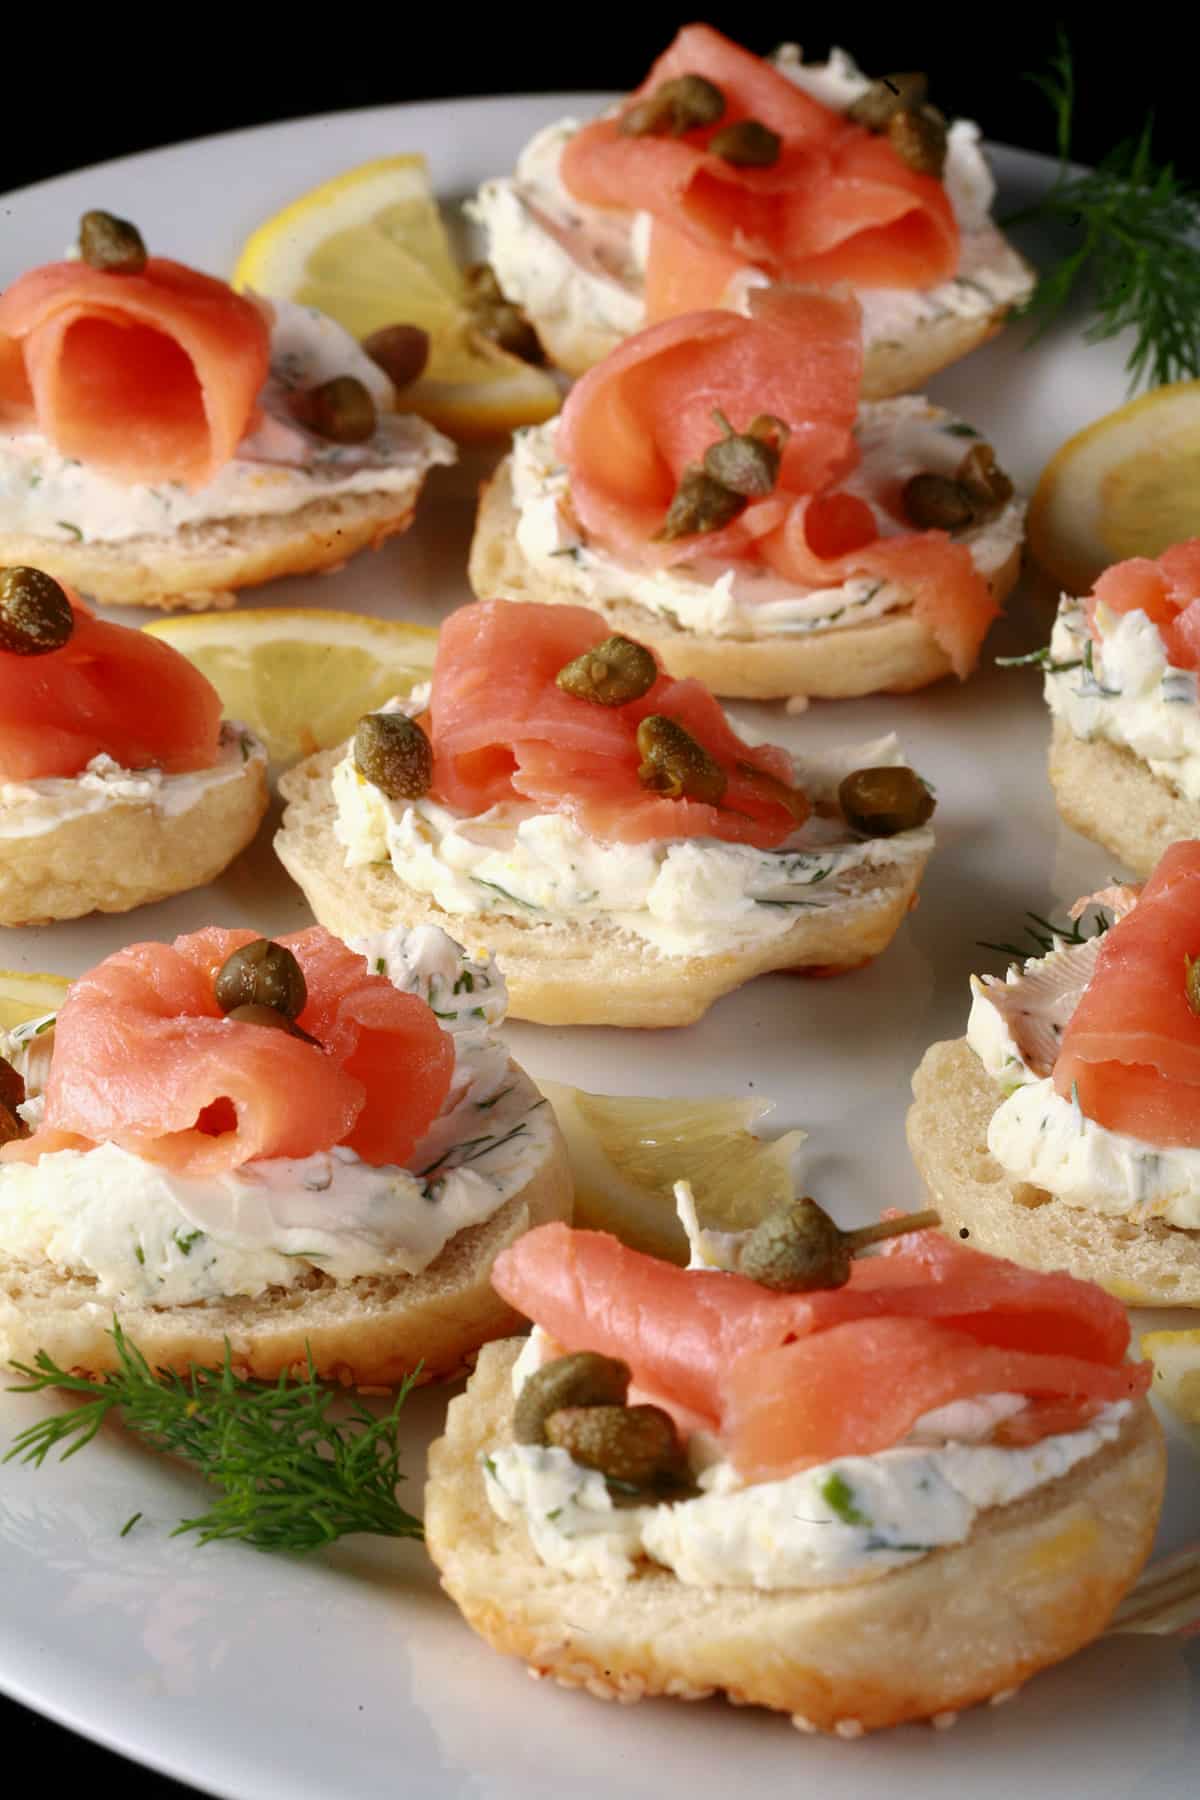 A platter of smoked salmon bagel bites garnished with capers and lemon slices.